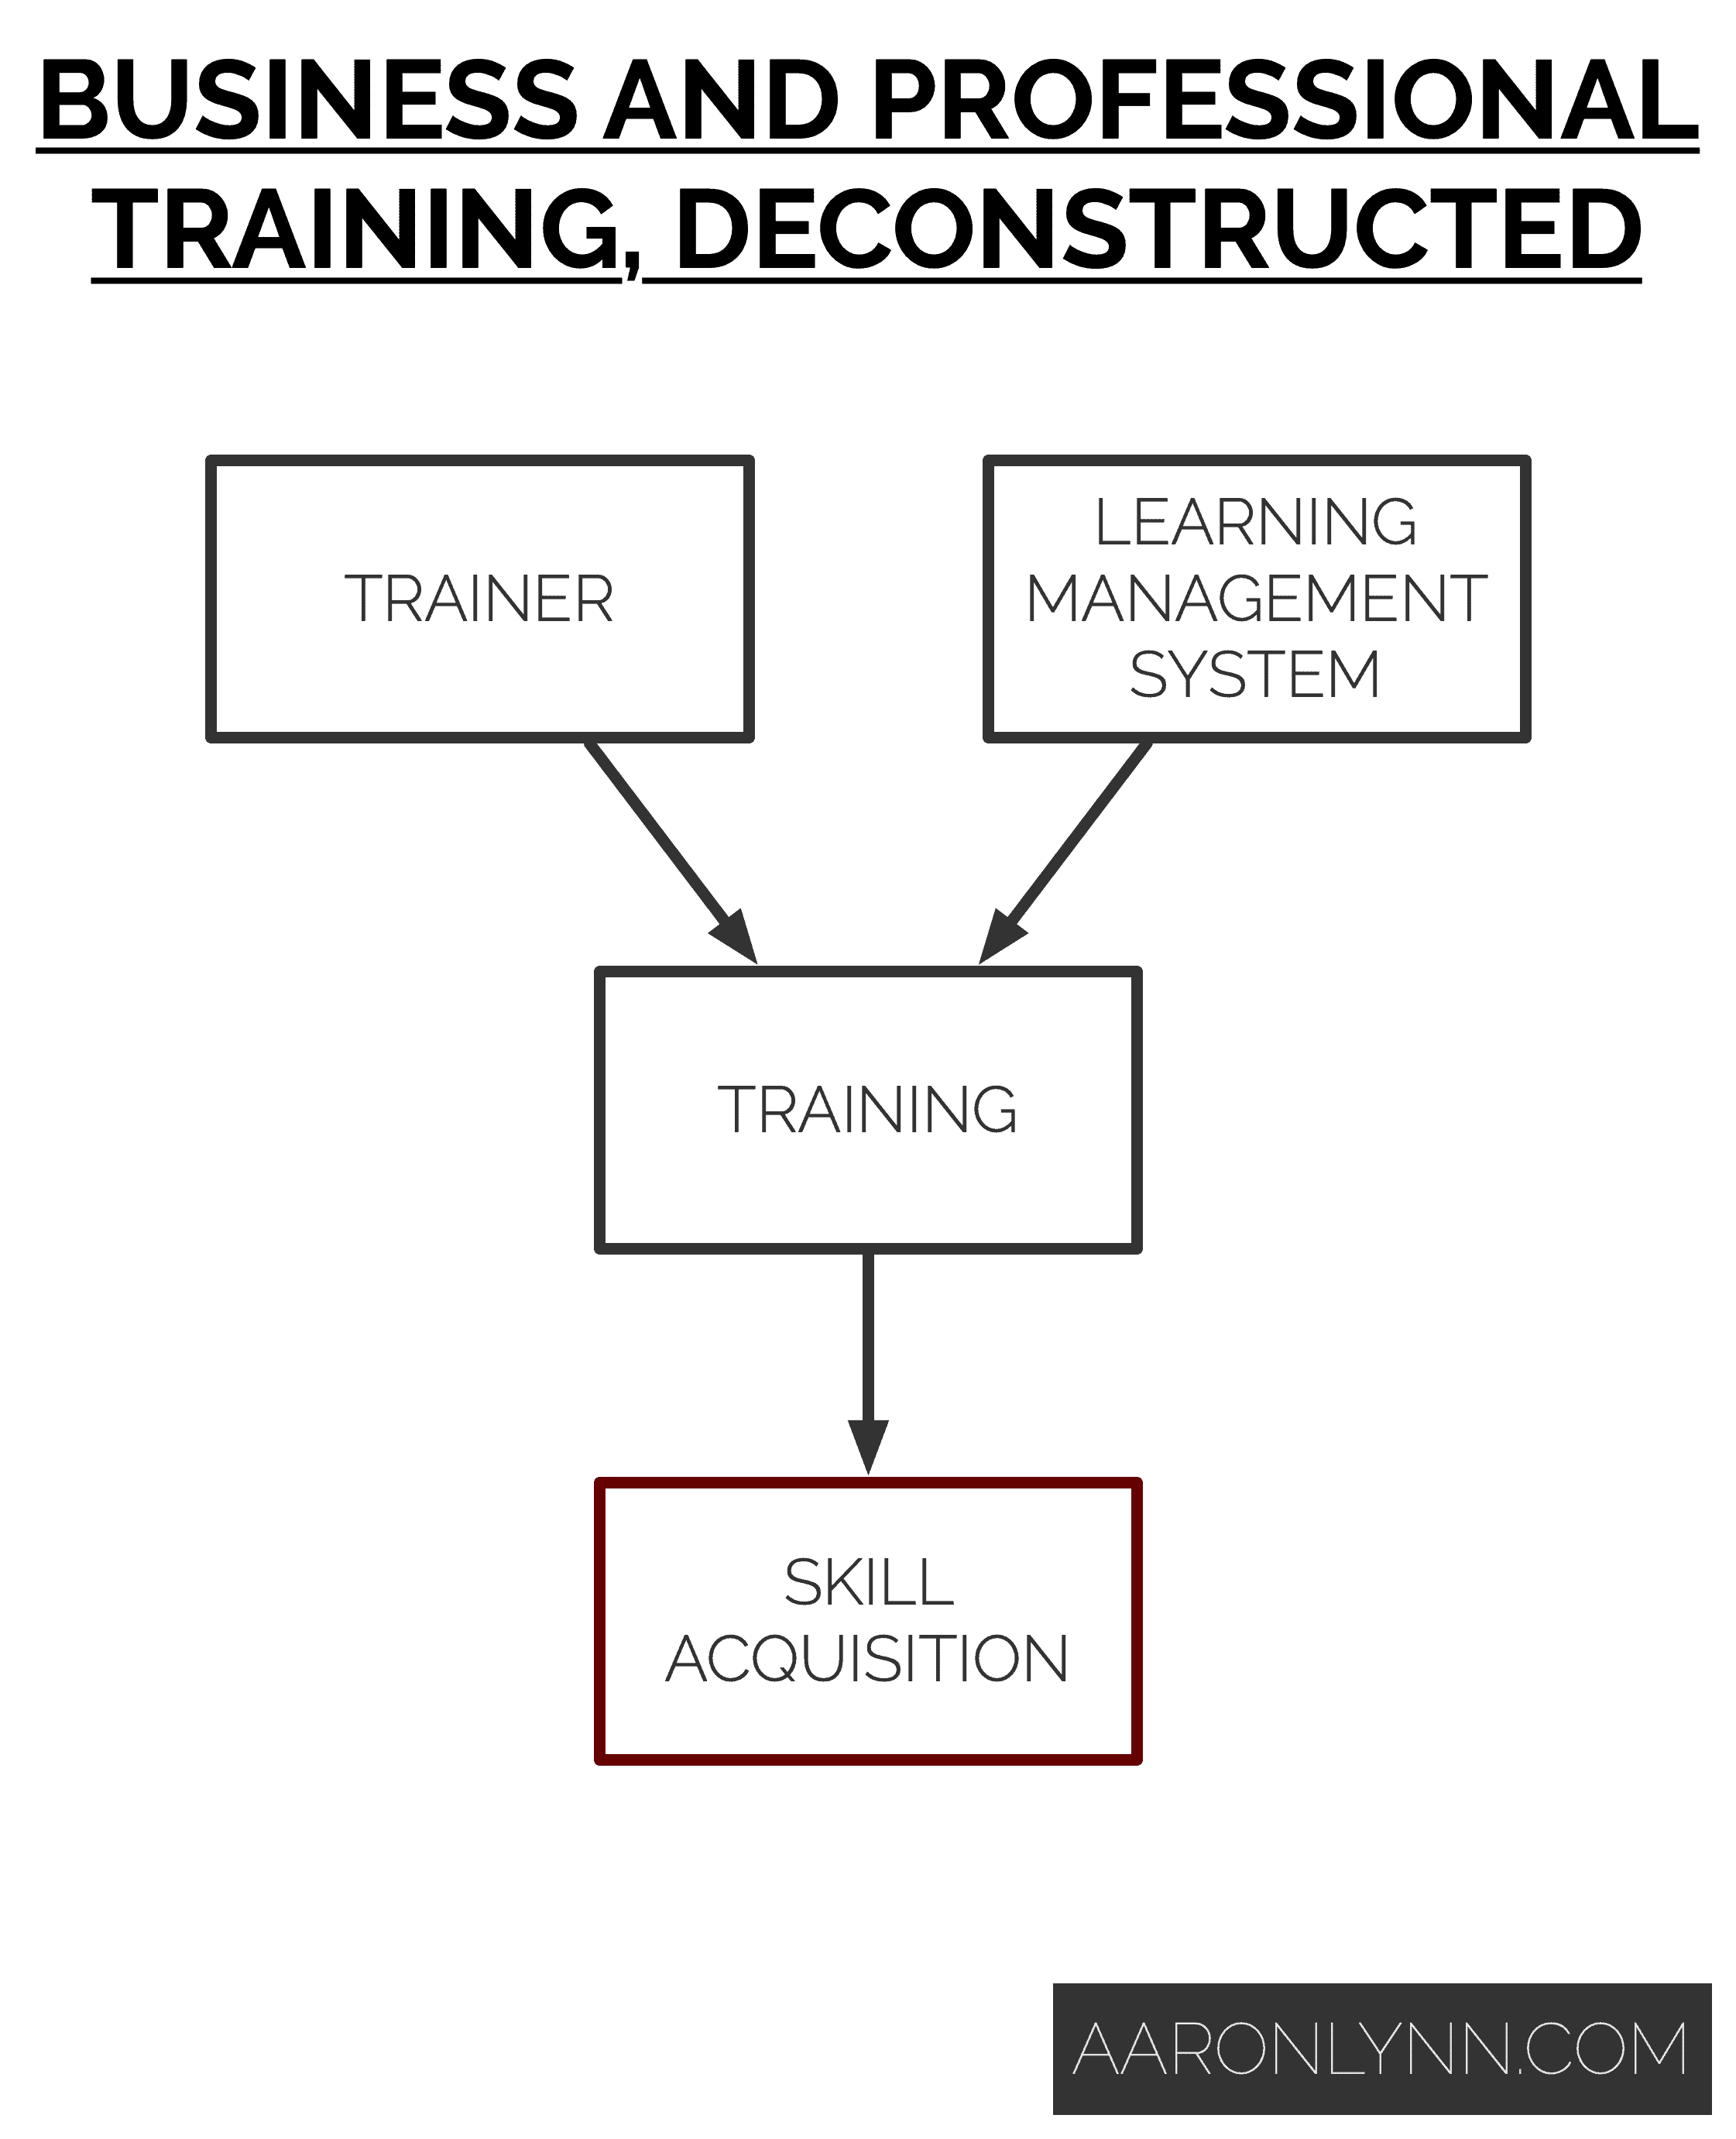 Business and Professional Training, Deconstructed